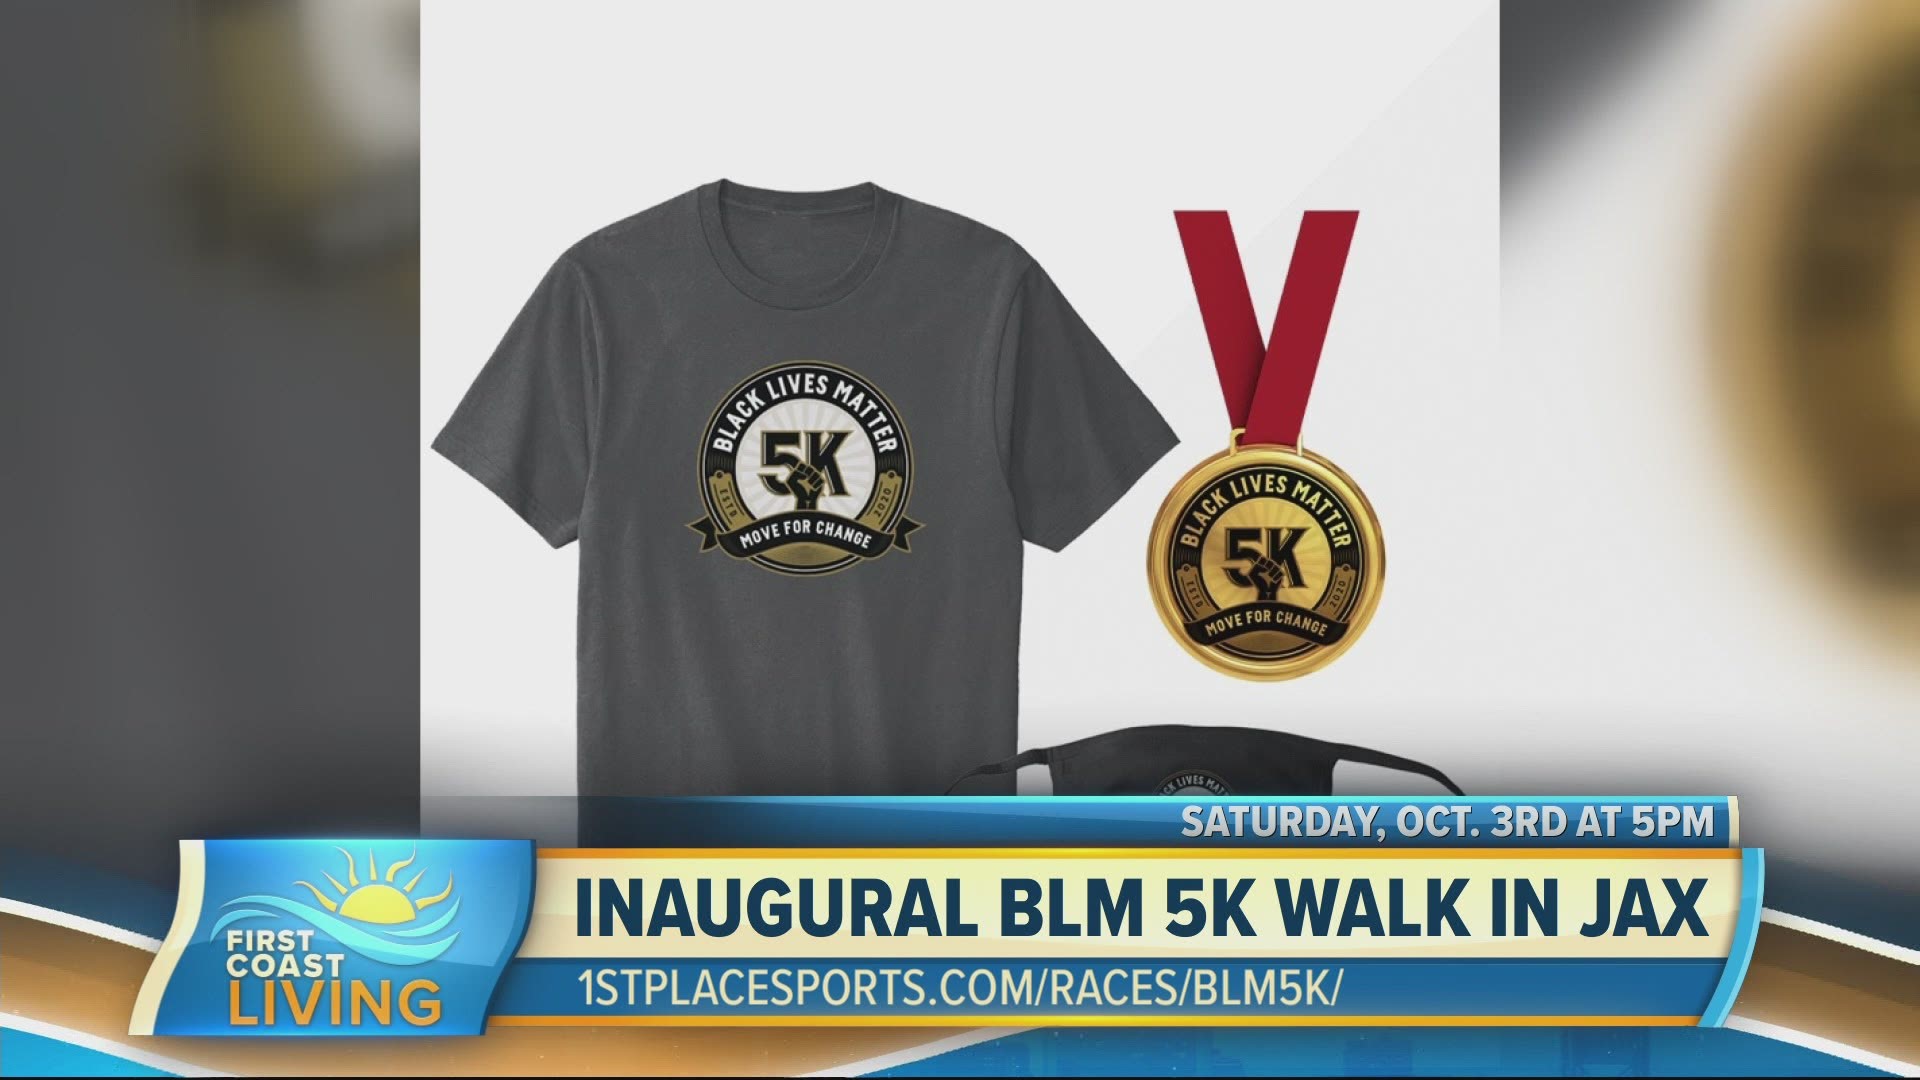 Sign up the Inaugural BLM 5K Walk in Jacksonville (FCL September 8th